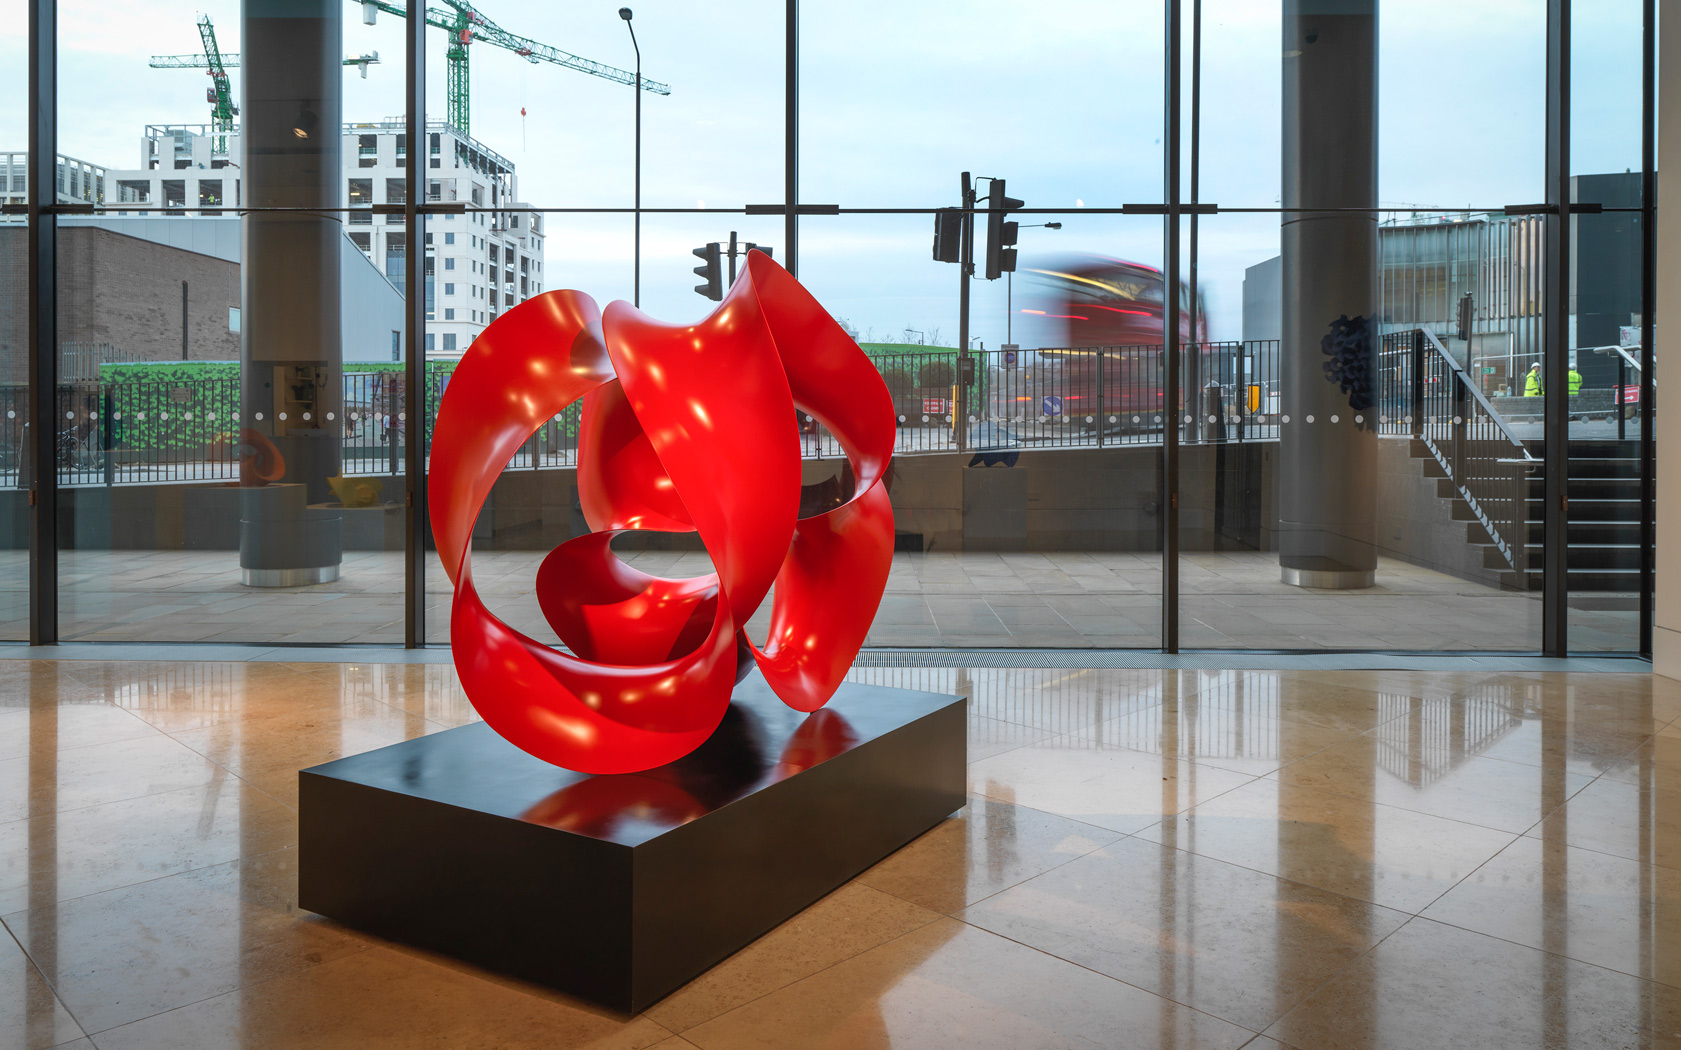 Perpetual Red, painted bronze, 146x138x130 cm. Courtesy of Pangolin London